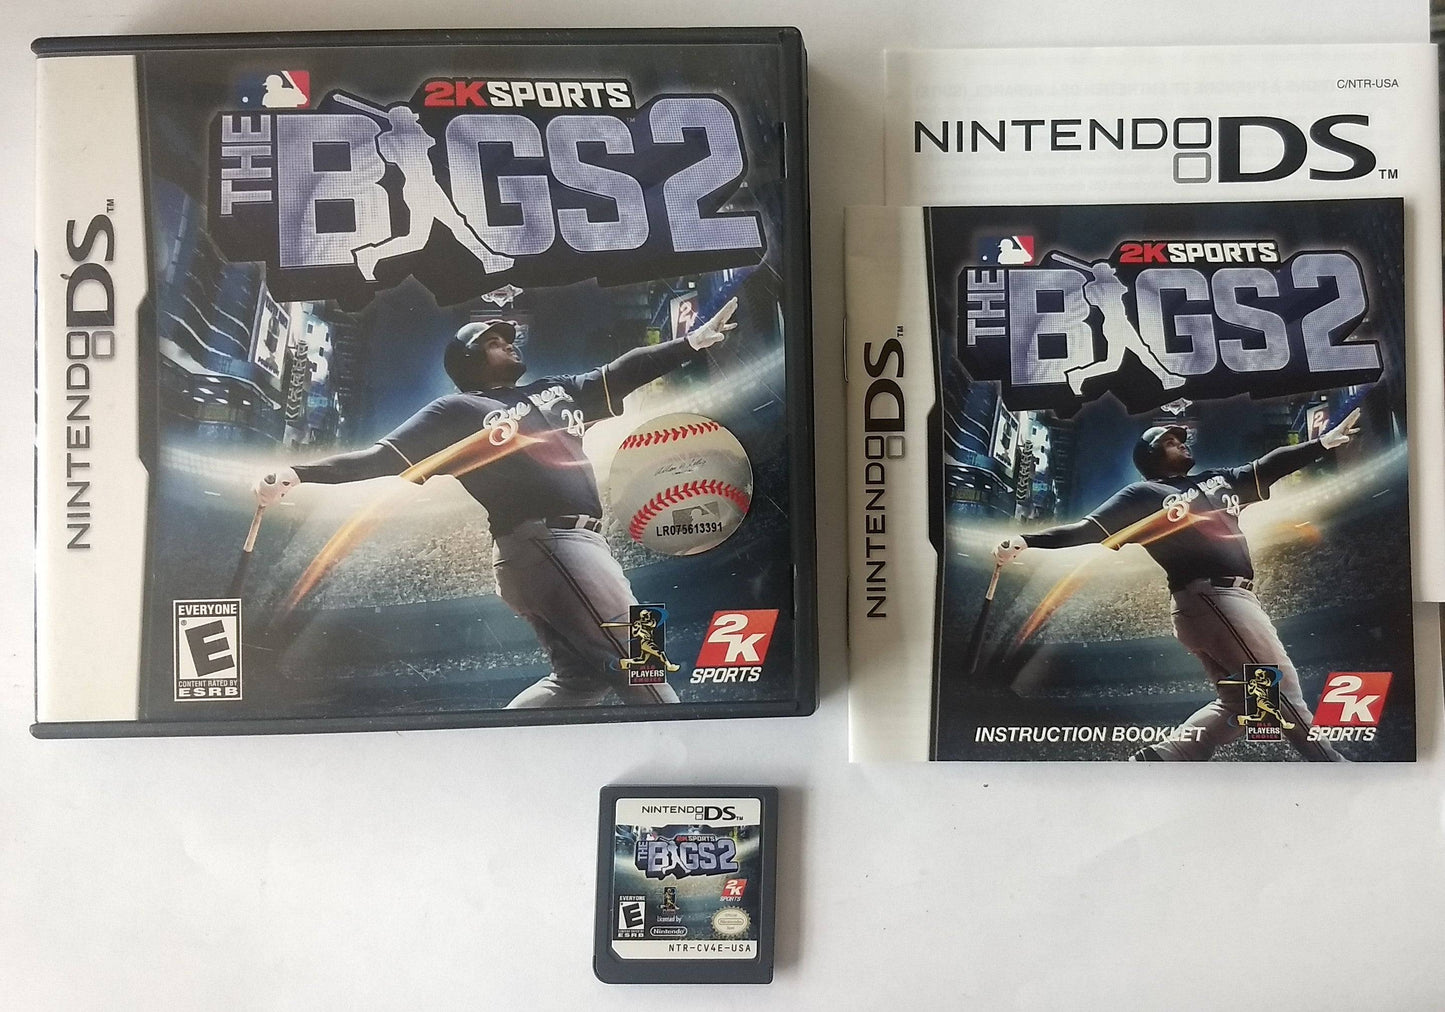 THE BIGS 2 (NINTENDO DS) - jeux video game-x